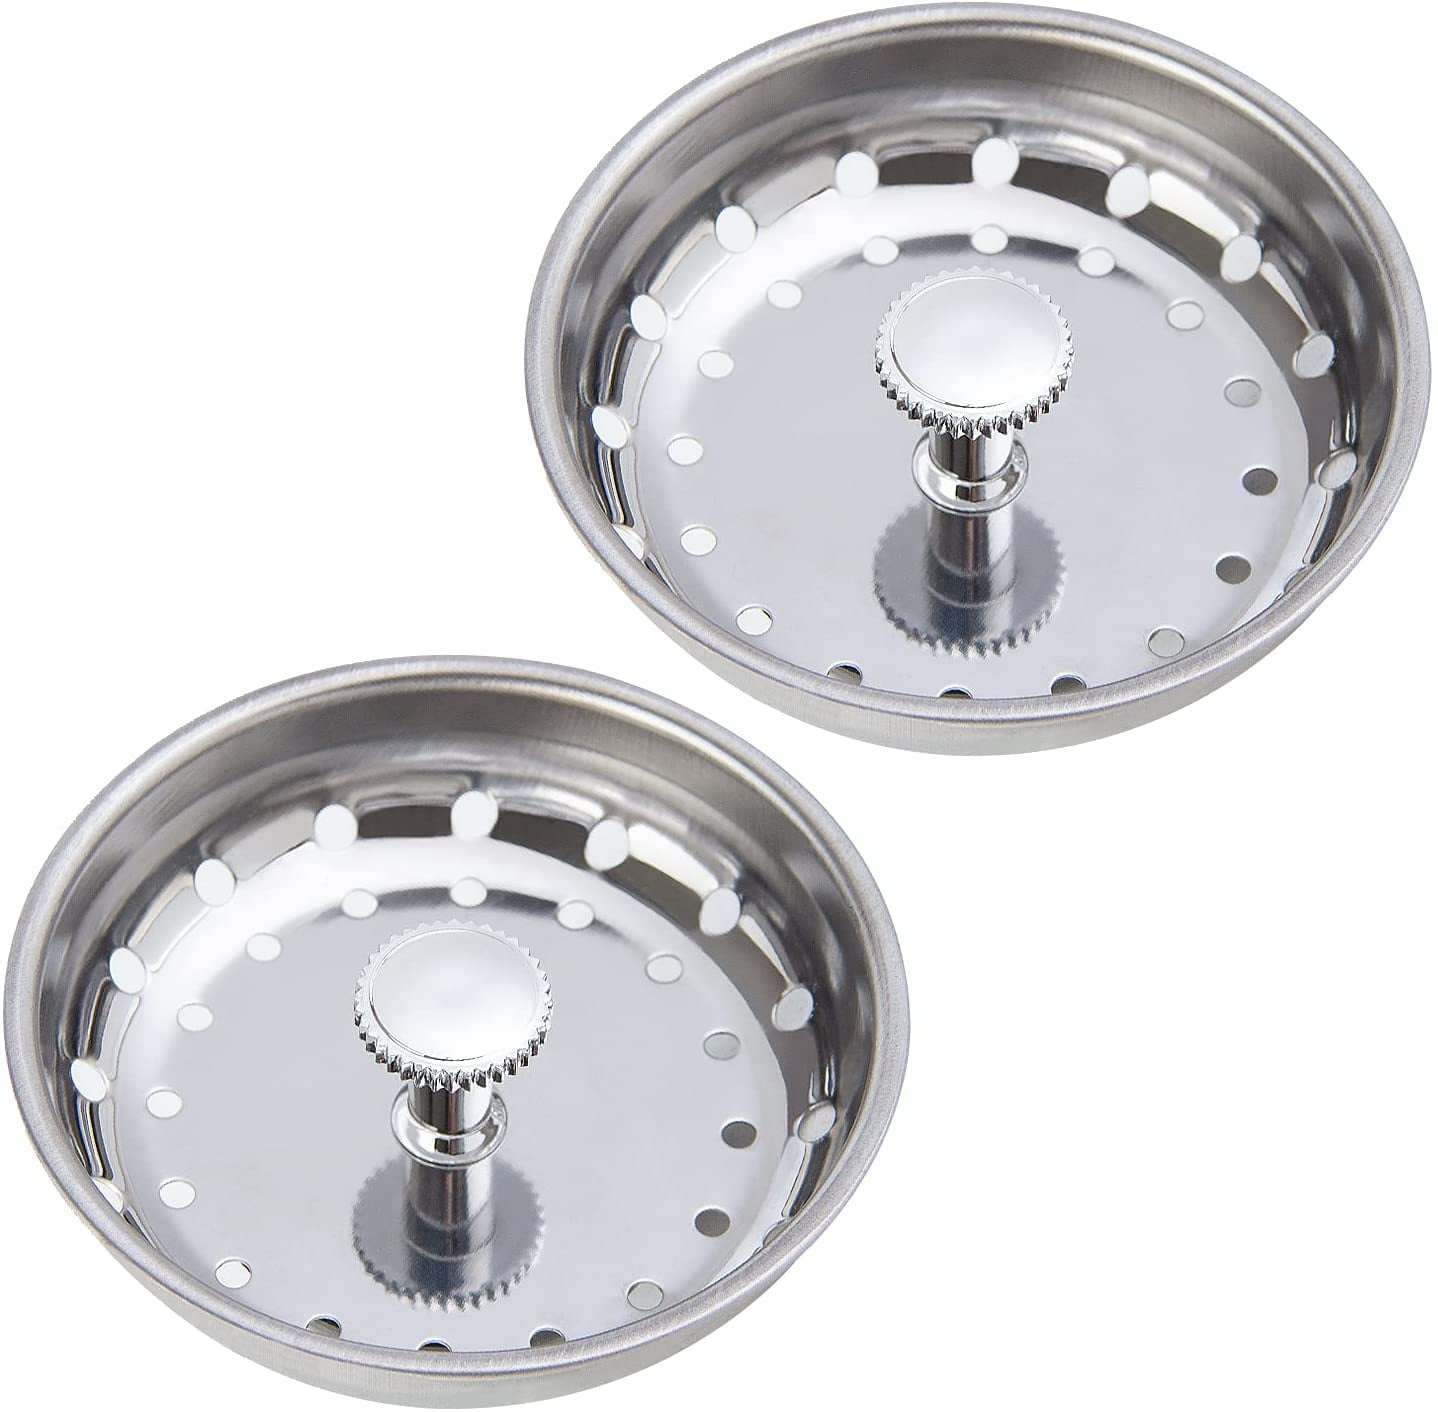 *NEW* WINCO SIK-3 STAINLESS STEEL 3" SINK STRAINER FREE SHIPPING! STOPPER 